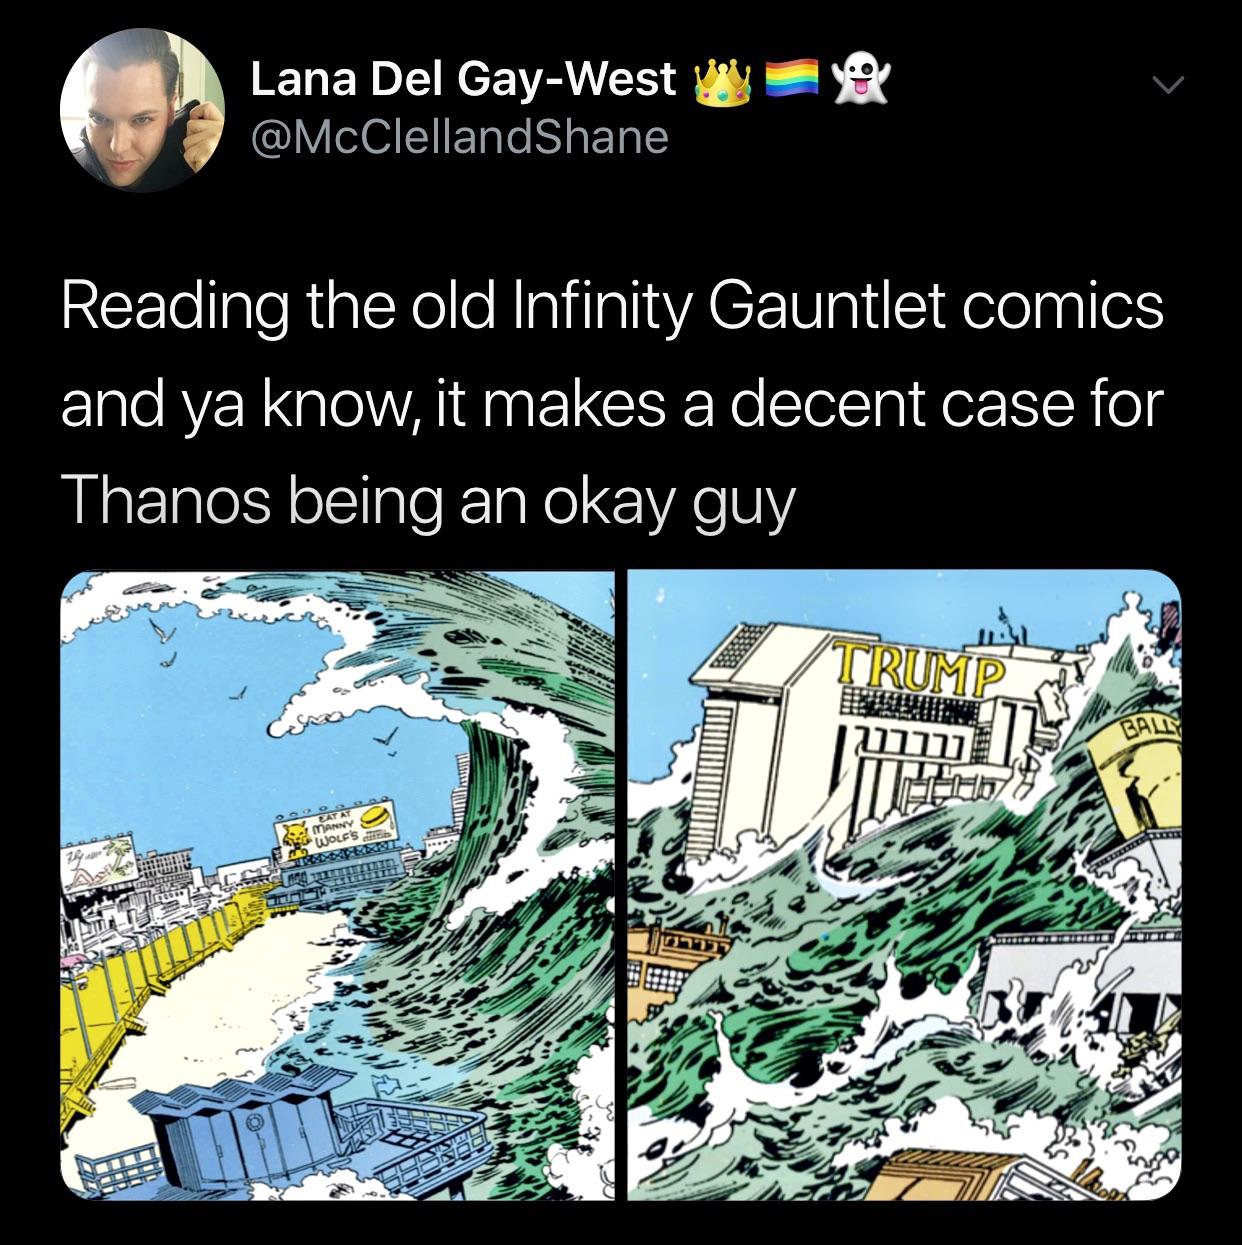 infinity gauntlet comic irl - Lana Del GayWest w Reading the old Infinity Gauntlet comics and ya know, it makes a decent case for Thanos being an okay guy 07711 Manny Wolf'S 04 Orde. Z 7